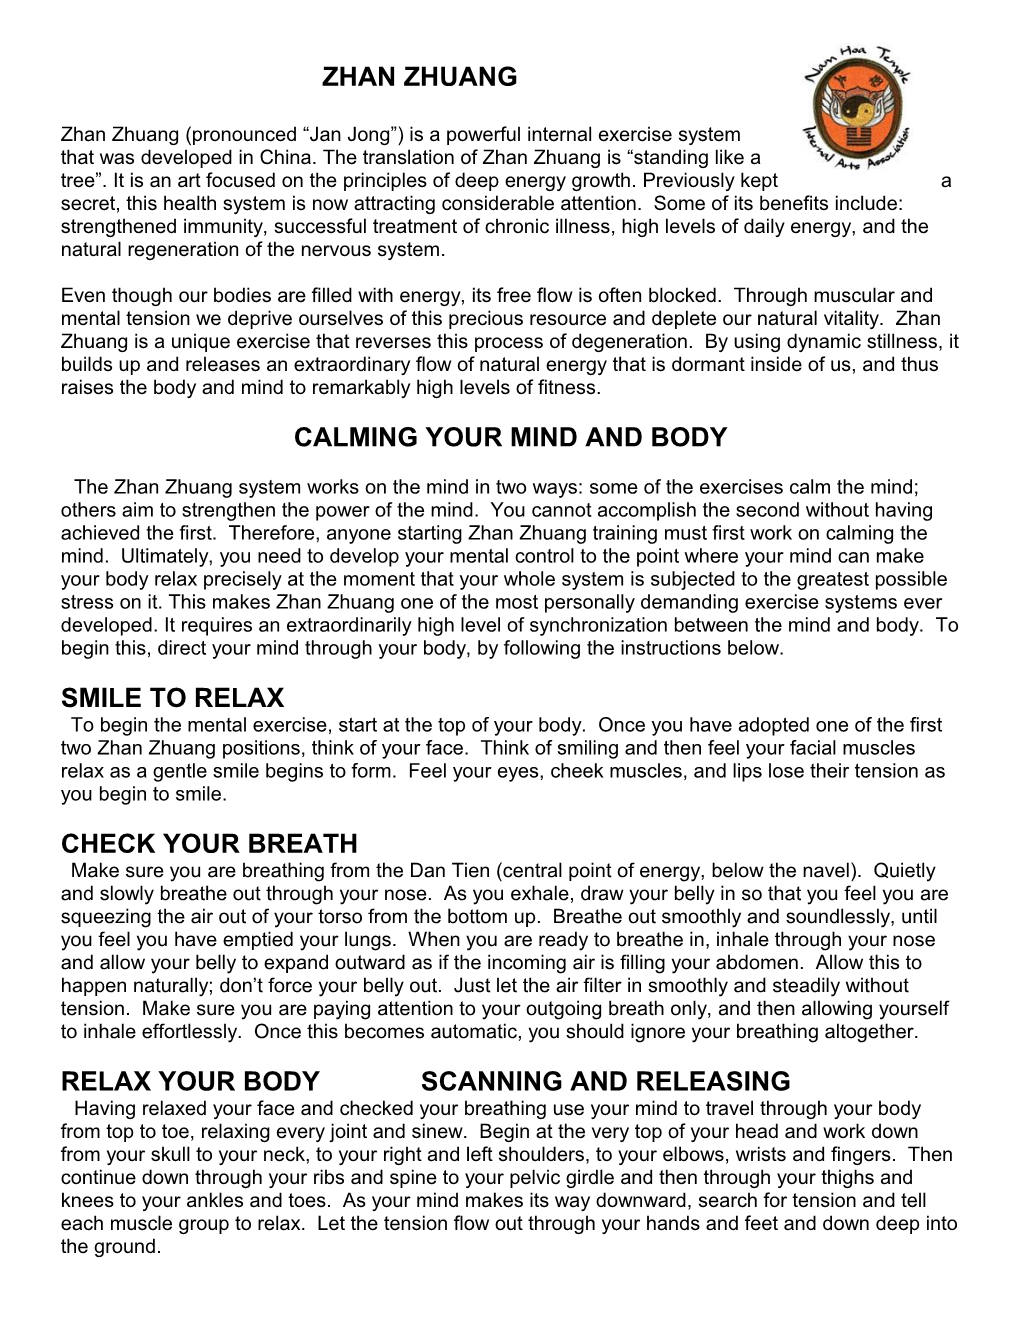 Calming Your Mind and Body